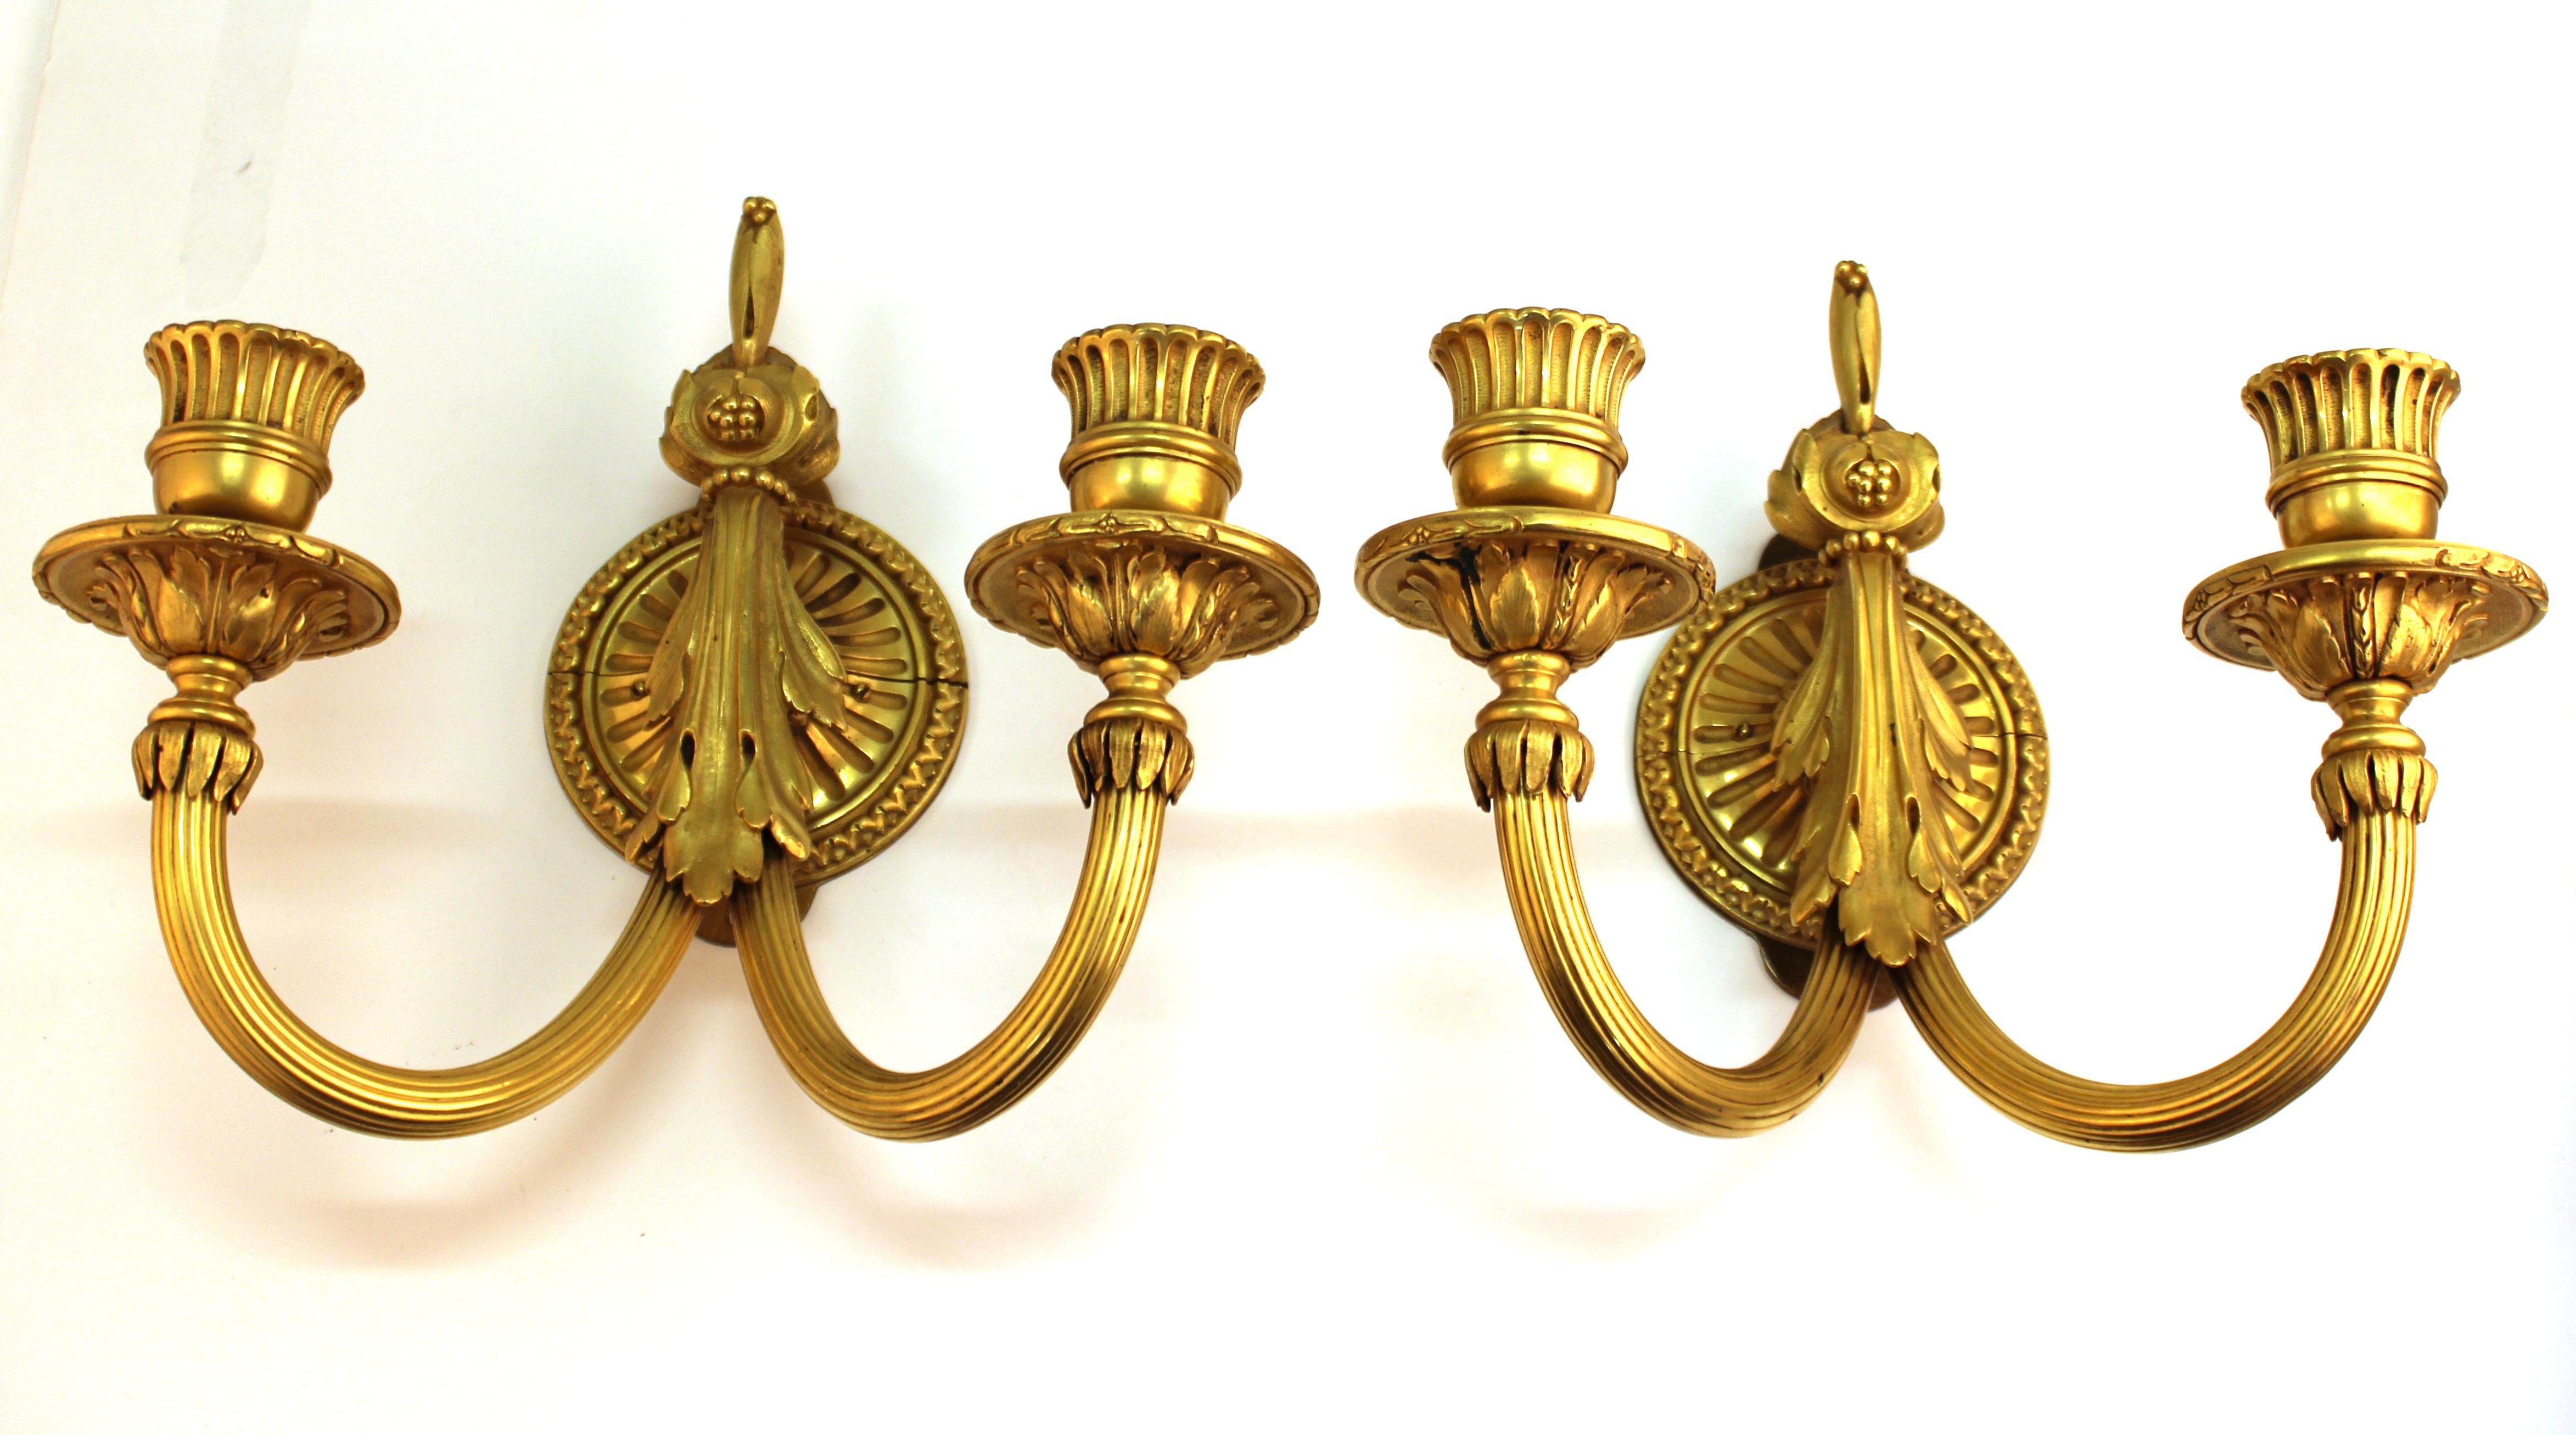 Louis XVI style pair of wall-mounted candle sconces in gilt bronze, with two candle sockets each. The pair is in great vintage condition and was likely made in Europe in the late 19th-early 20th century.